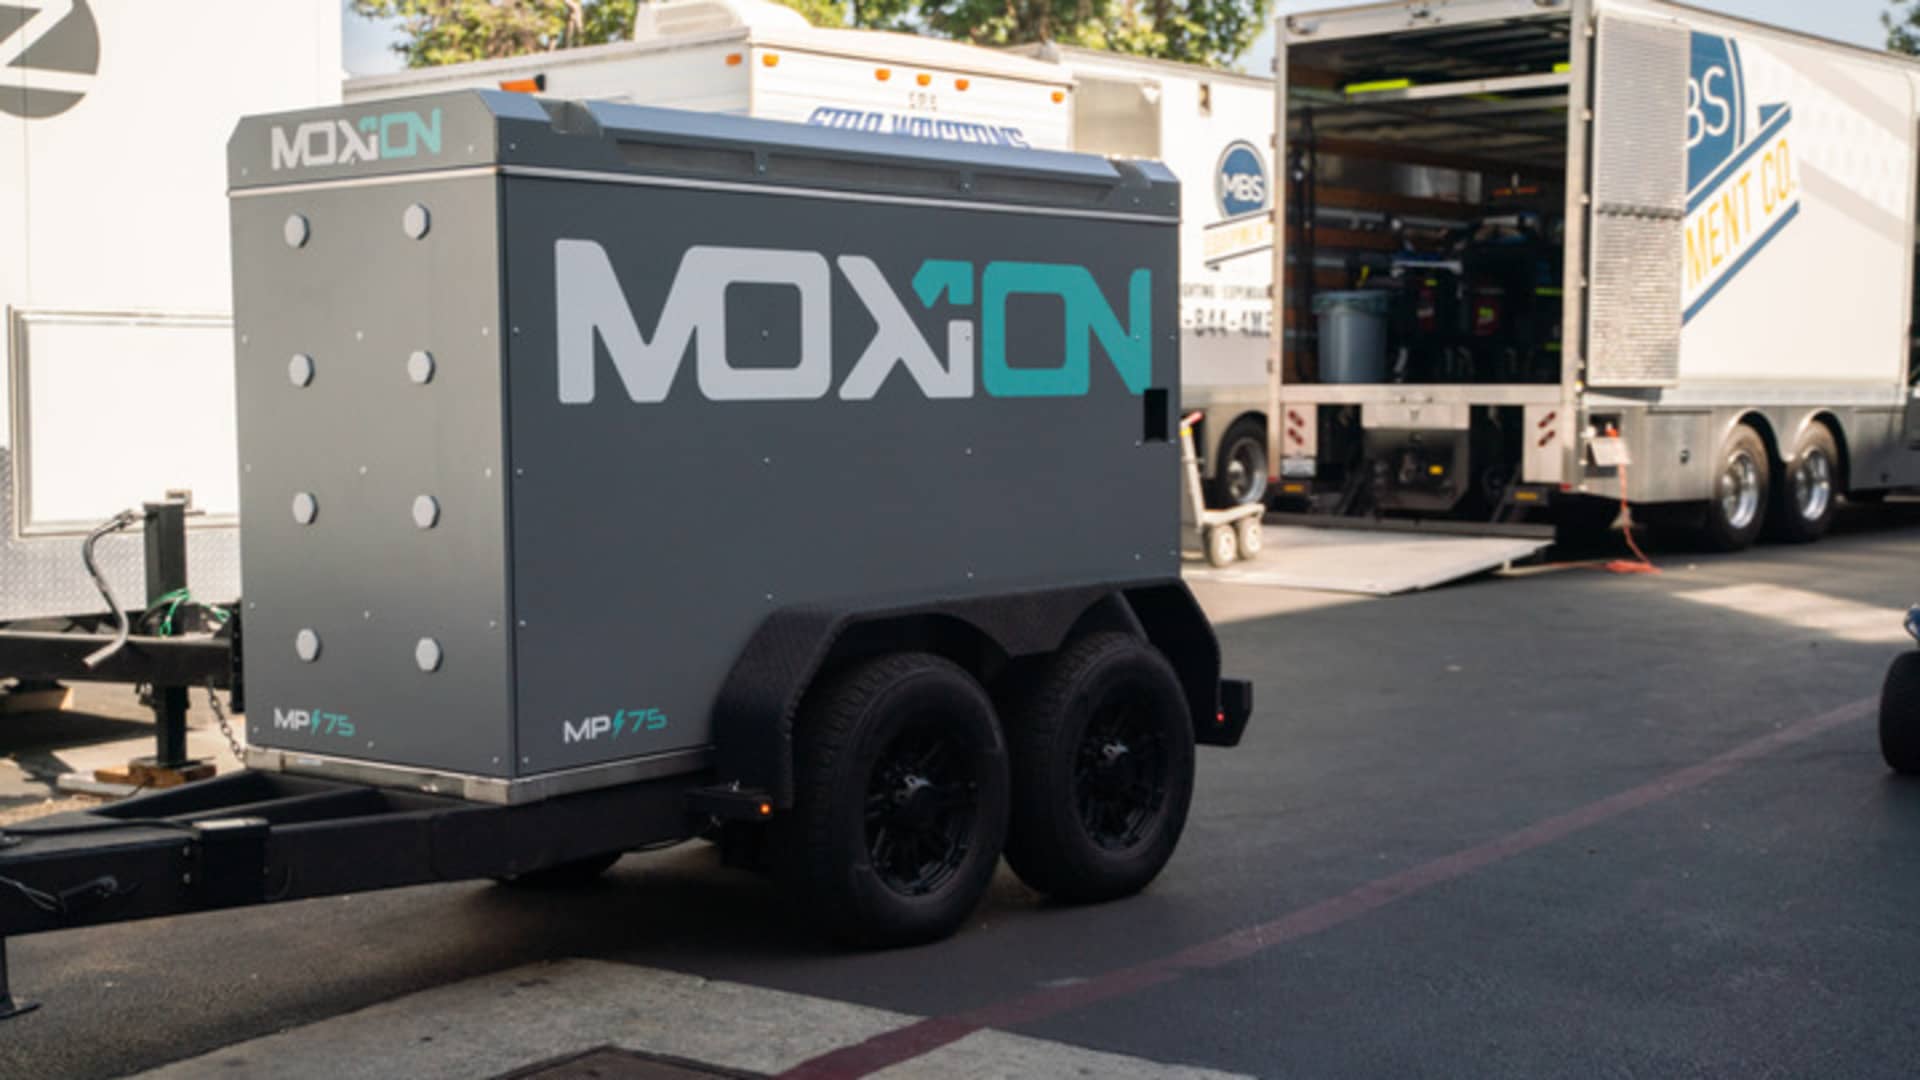 Amazon and Microsoft are backing this battery-powered generator startup